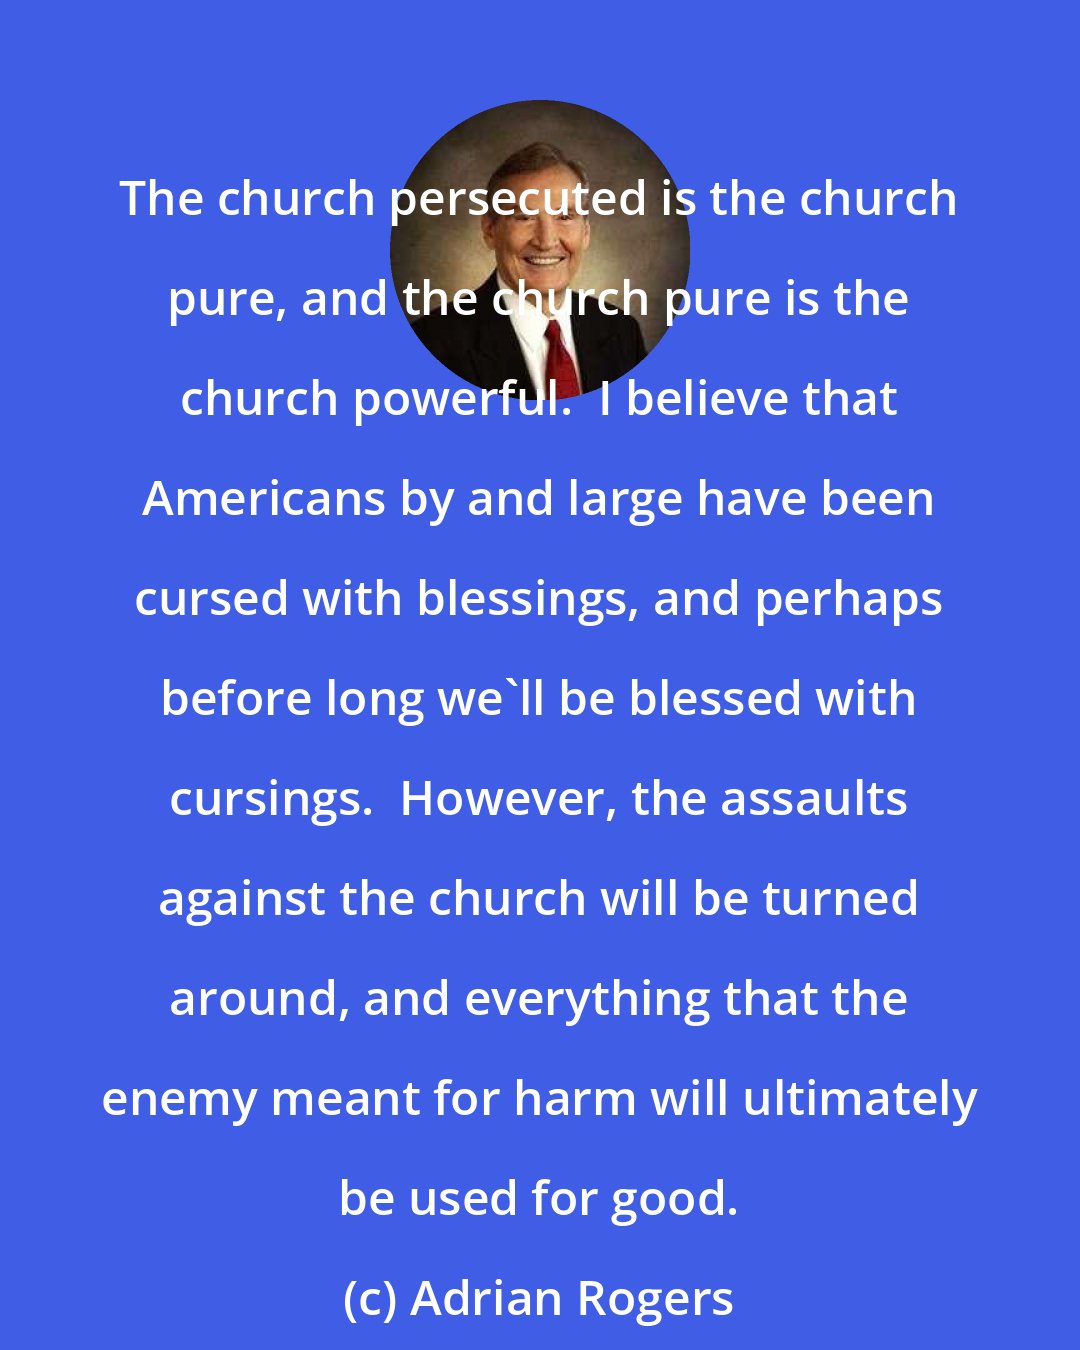 Adrian Rogers: The church persecuted is the church pure, and the church pure is the church powerful.  I believe that Americans by and large have been cursed with blessings, and perhaps before long we'll be blessed with cursings.  However, the assaults against the church will be turned around, and everything that the enemy meant for harm will ultimately be used for good.